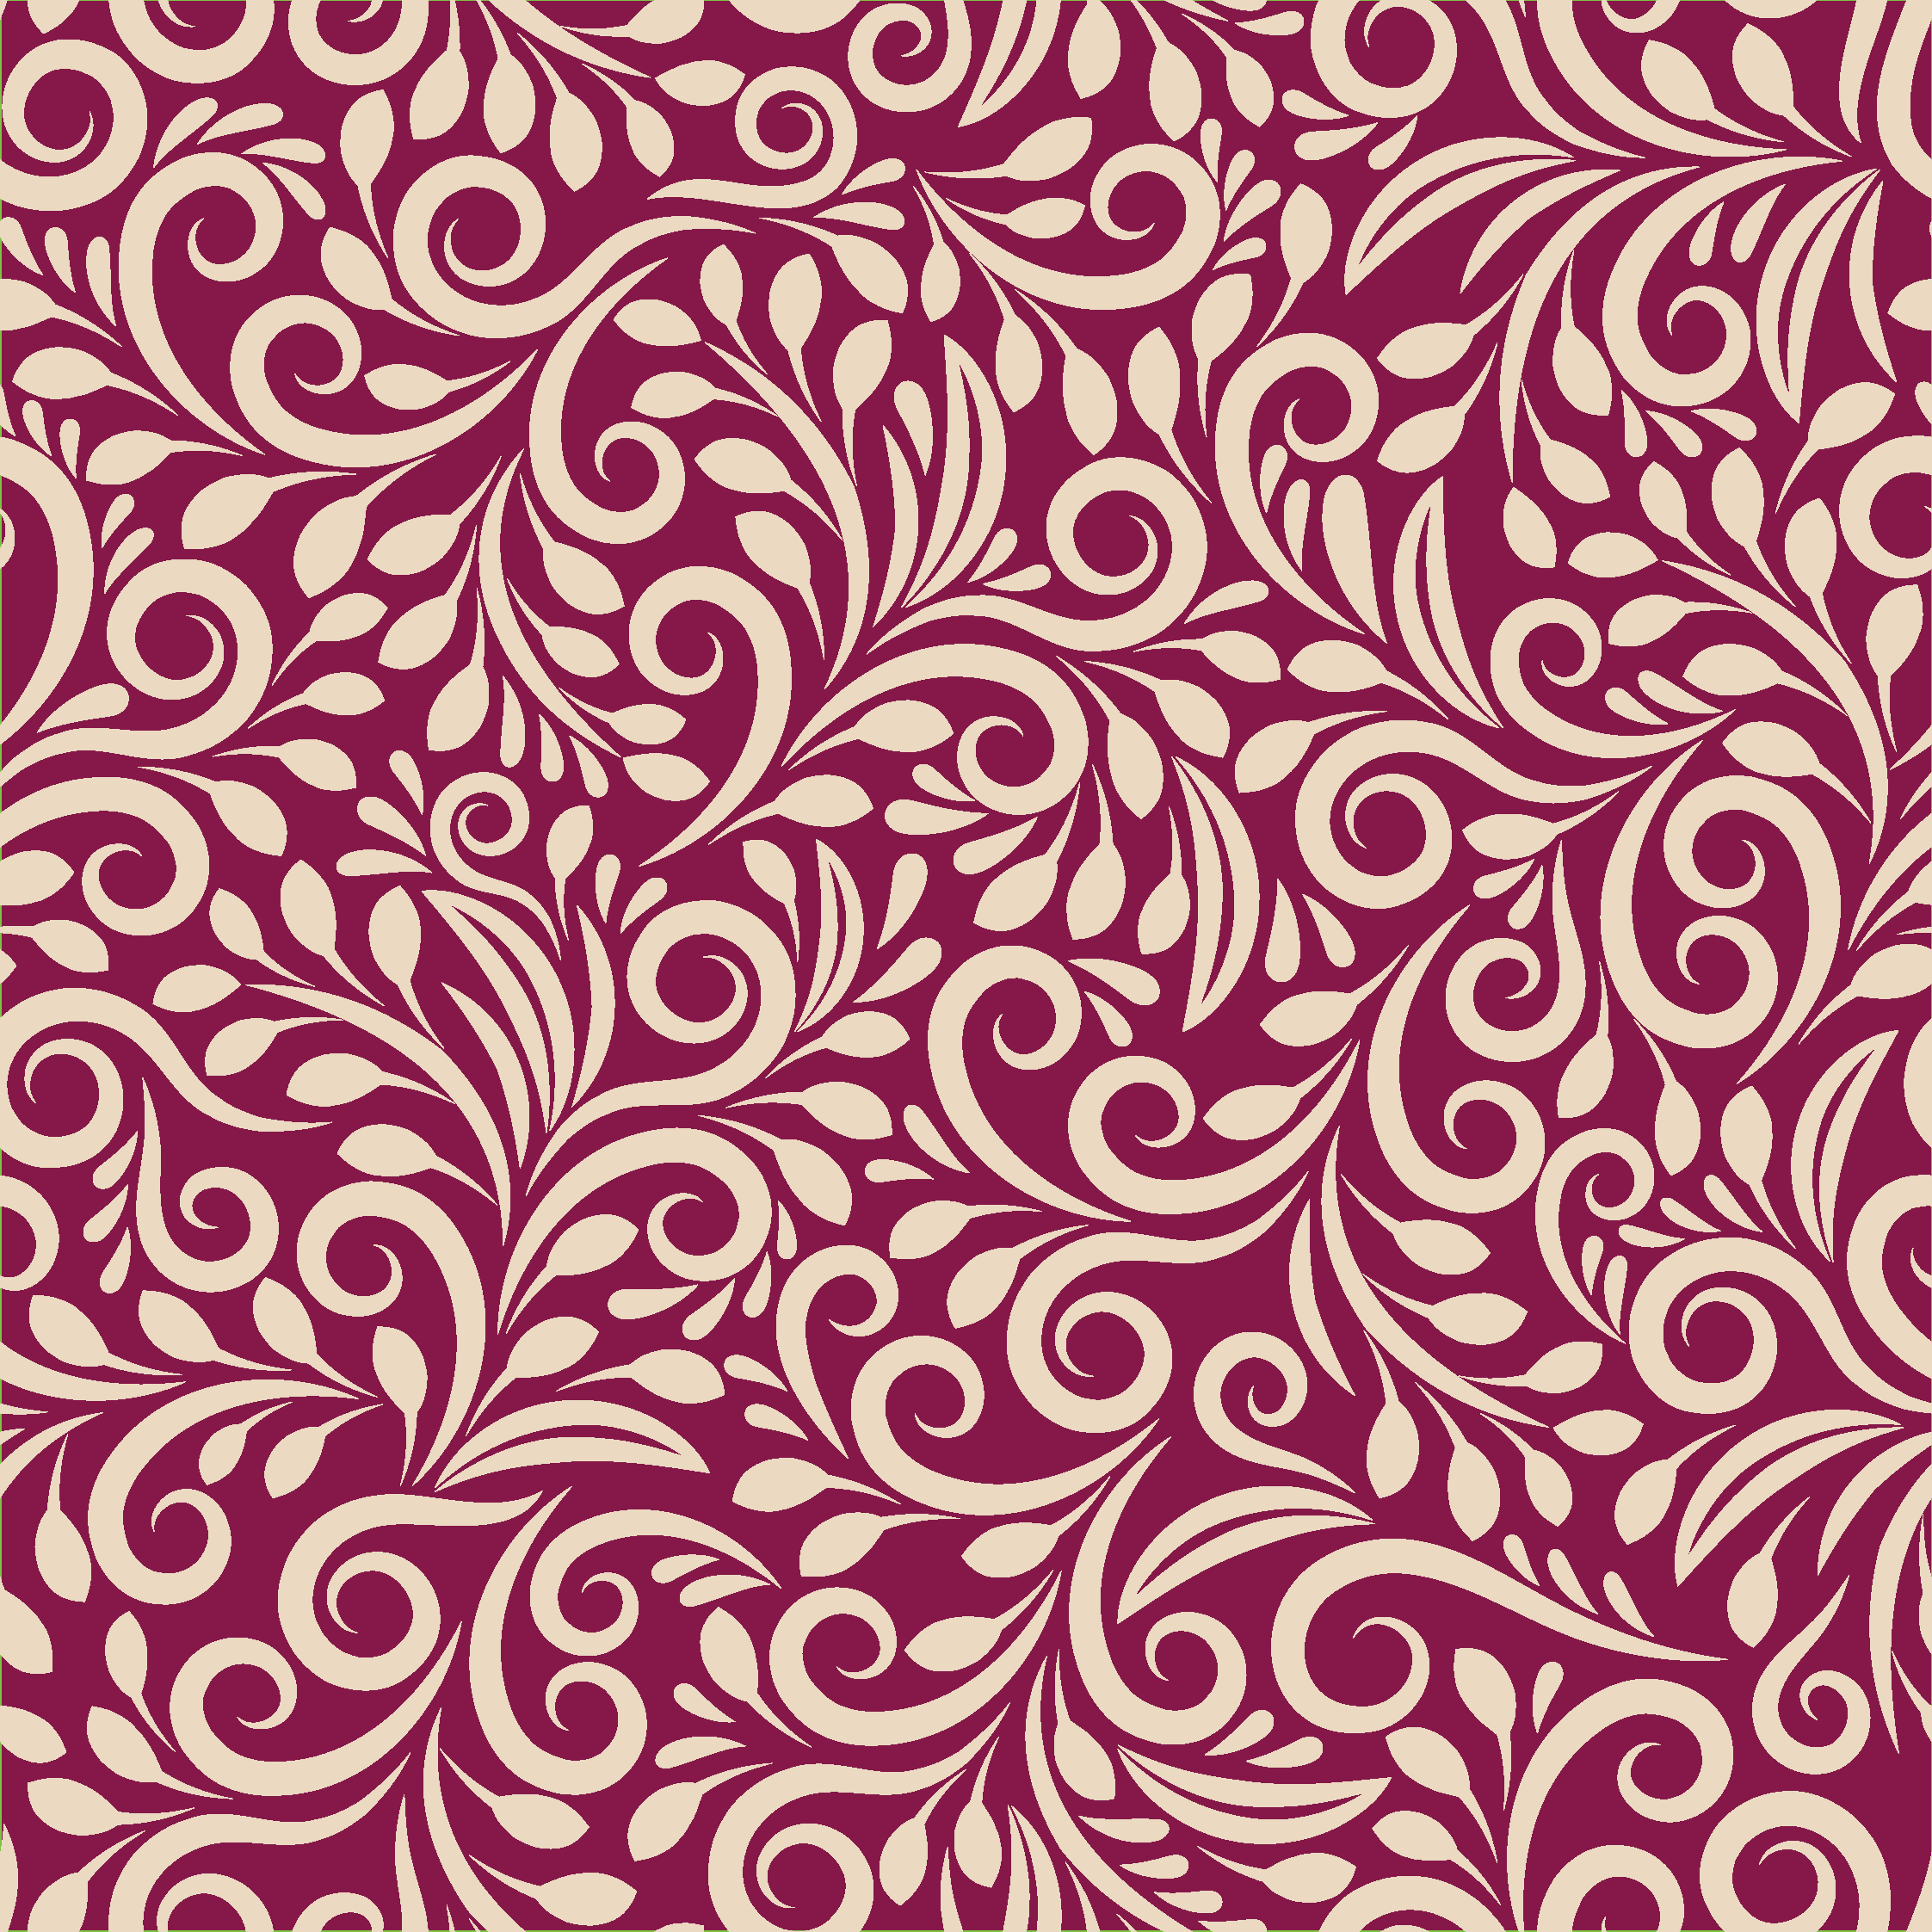 NEW FLORAL PATTERN DESING FOR BACKGROUNDS AND ARTS pinterest preview image.